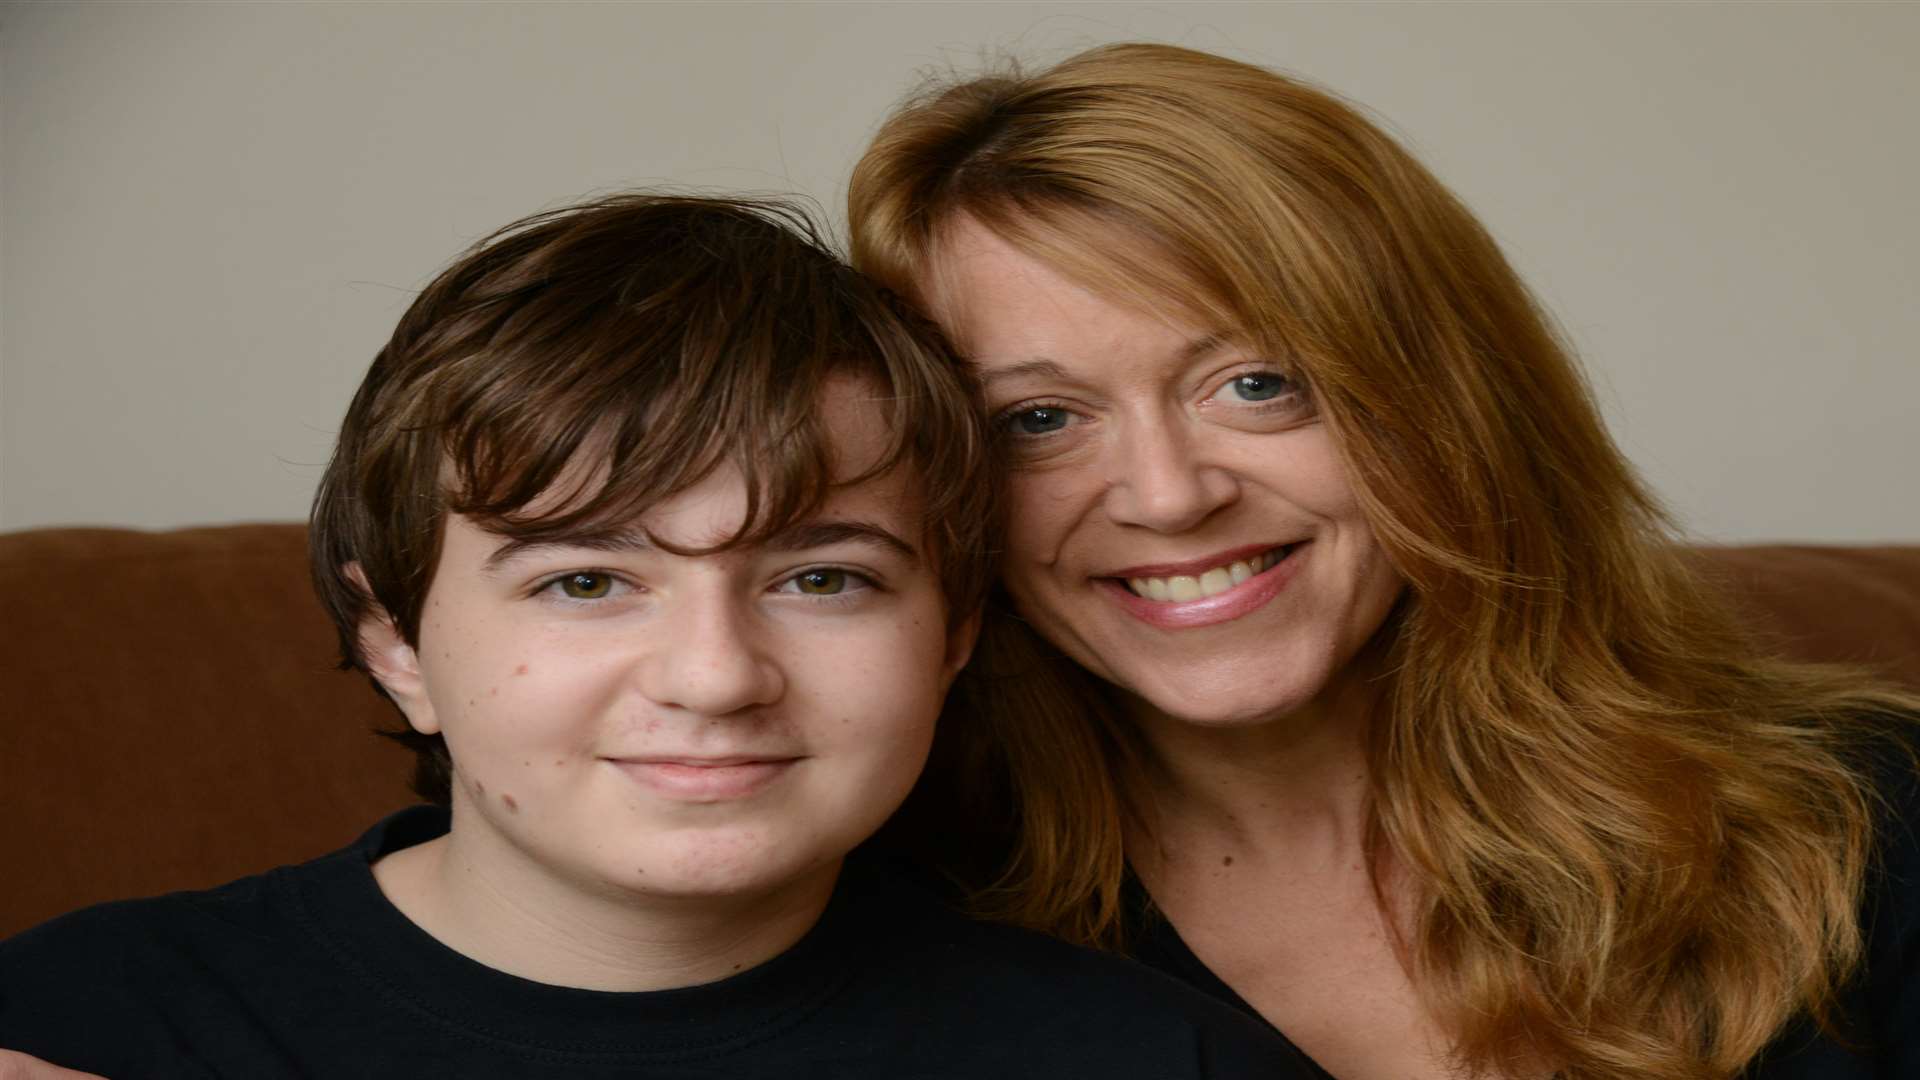 Cameron Norman,13, with his mum Andrea Jacobs. Picture: Gary Browne